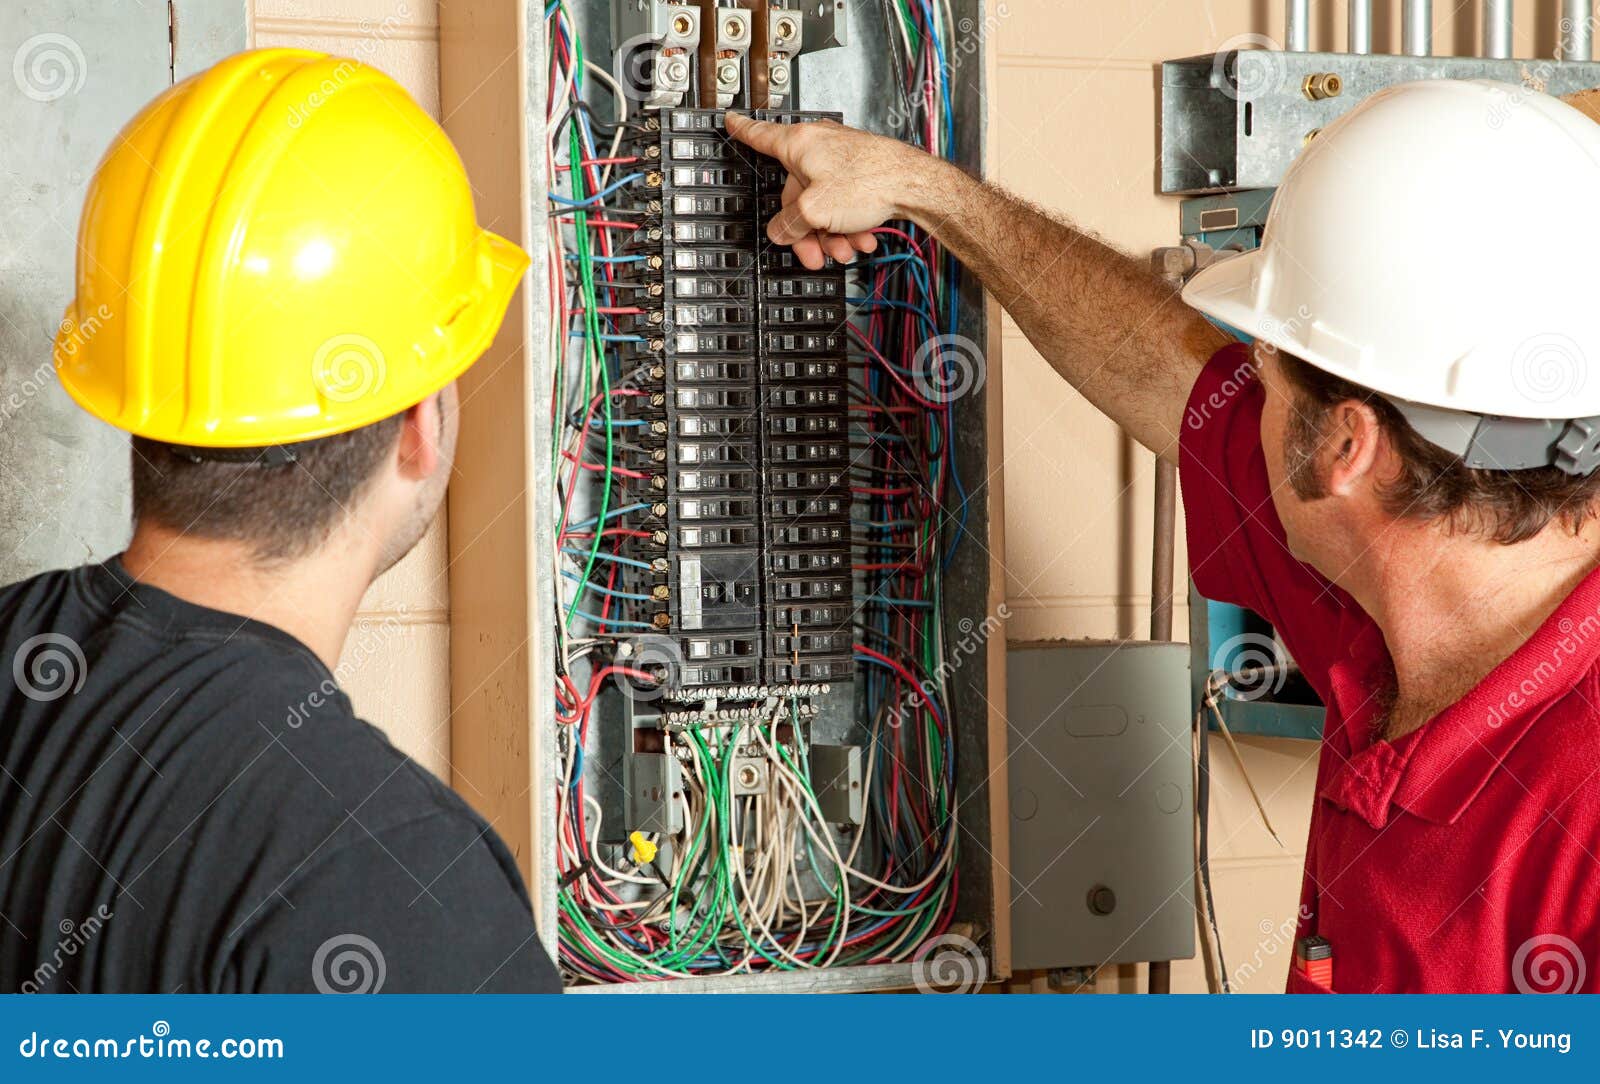 electricians replace 20 amp breaker